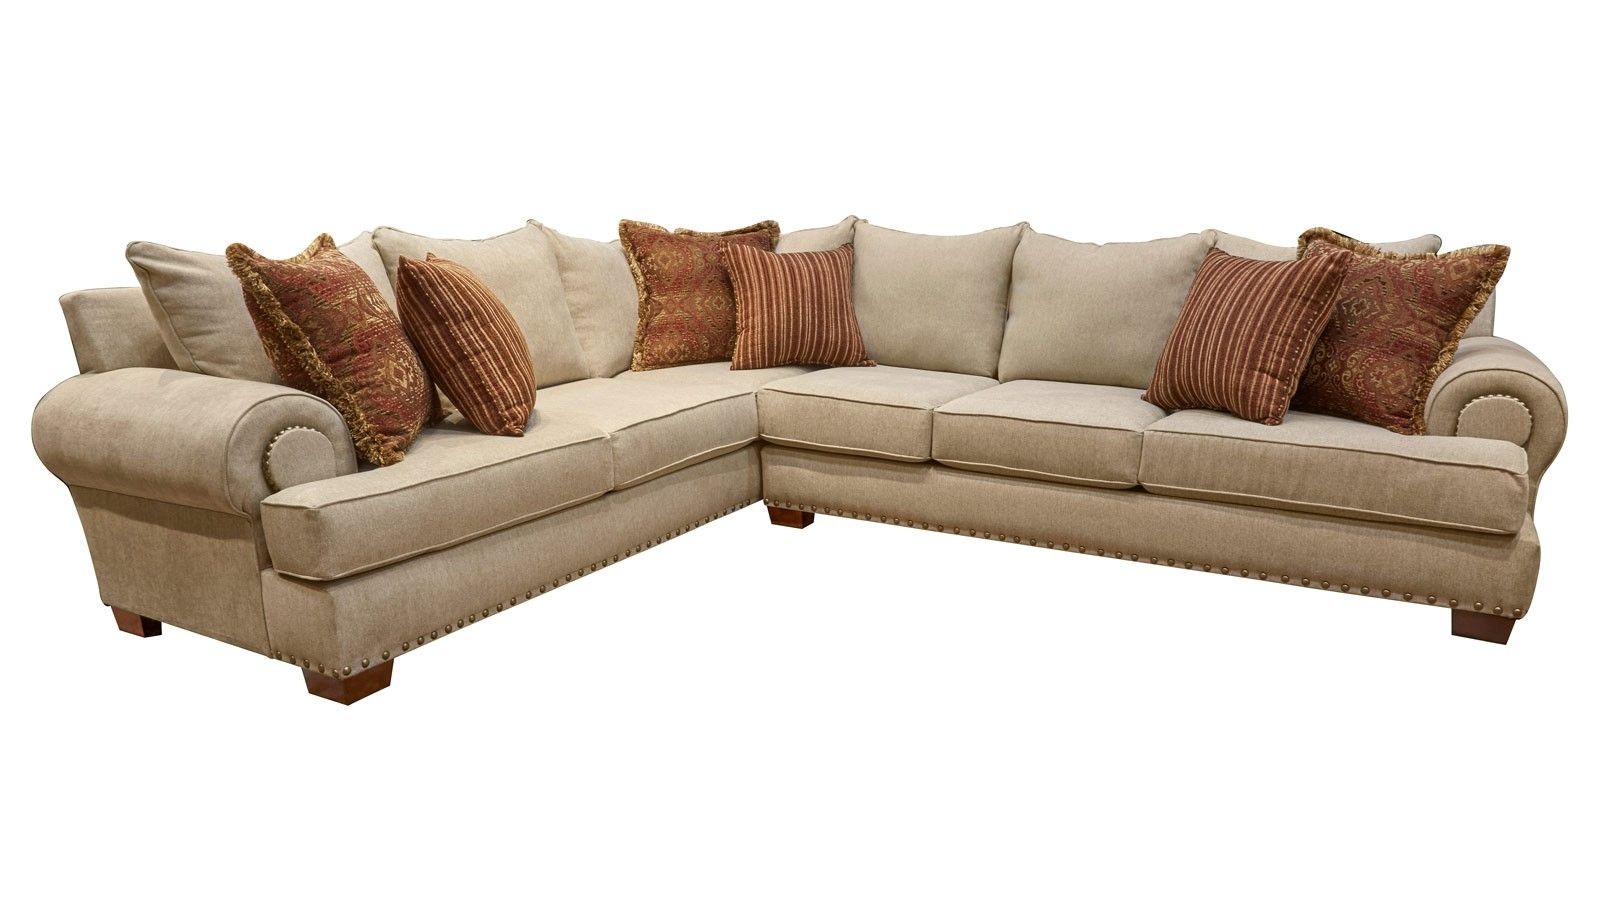 Rice Laf Sectional | Gallery Furniture Intended For Gallery Furniture Sectional Sofas (View 4 of 10)